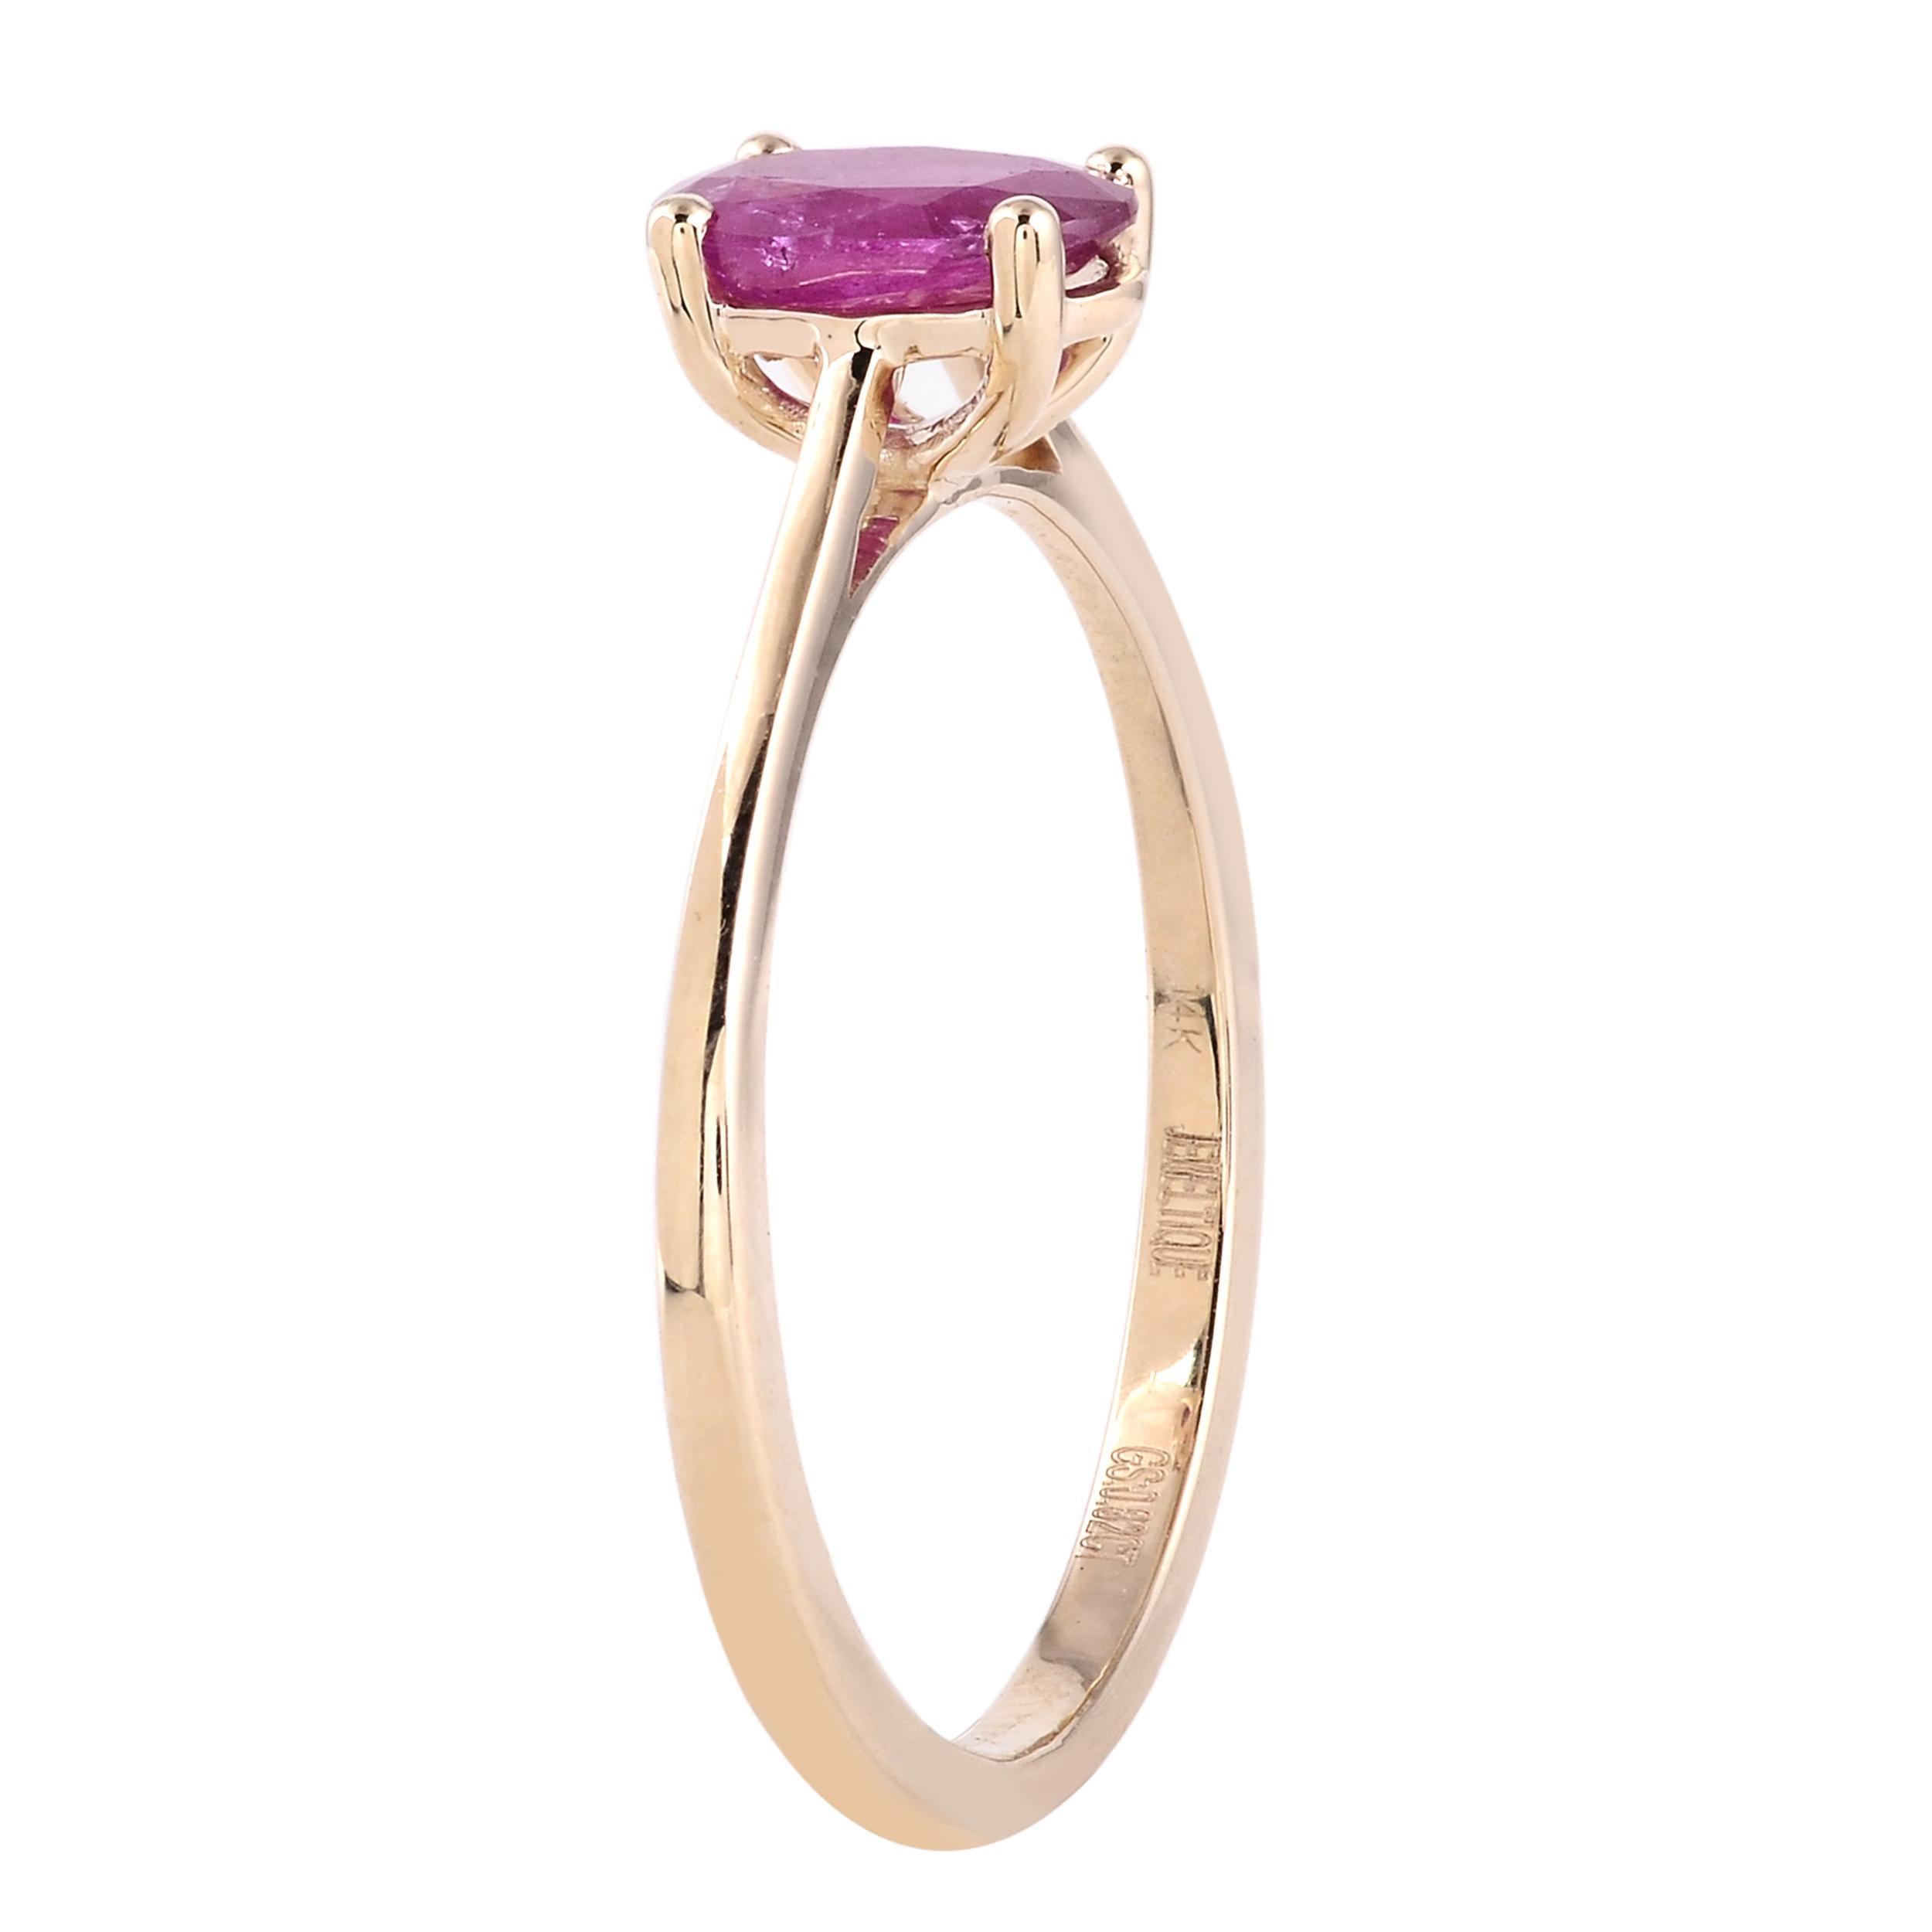 Oval Cut Elegant 14K Ruby Cocktail Ring, Size 6.75 - Luxury Statement Jewelry Piece For Sale